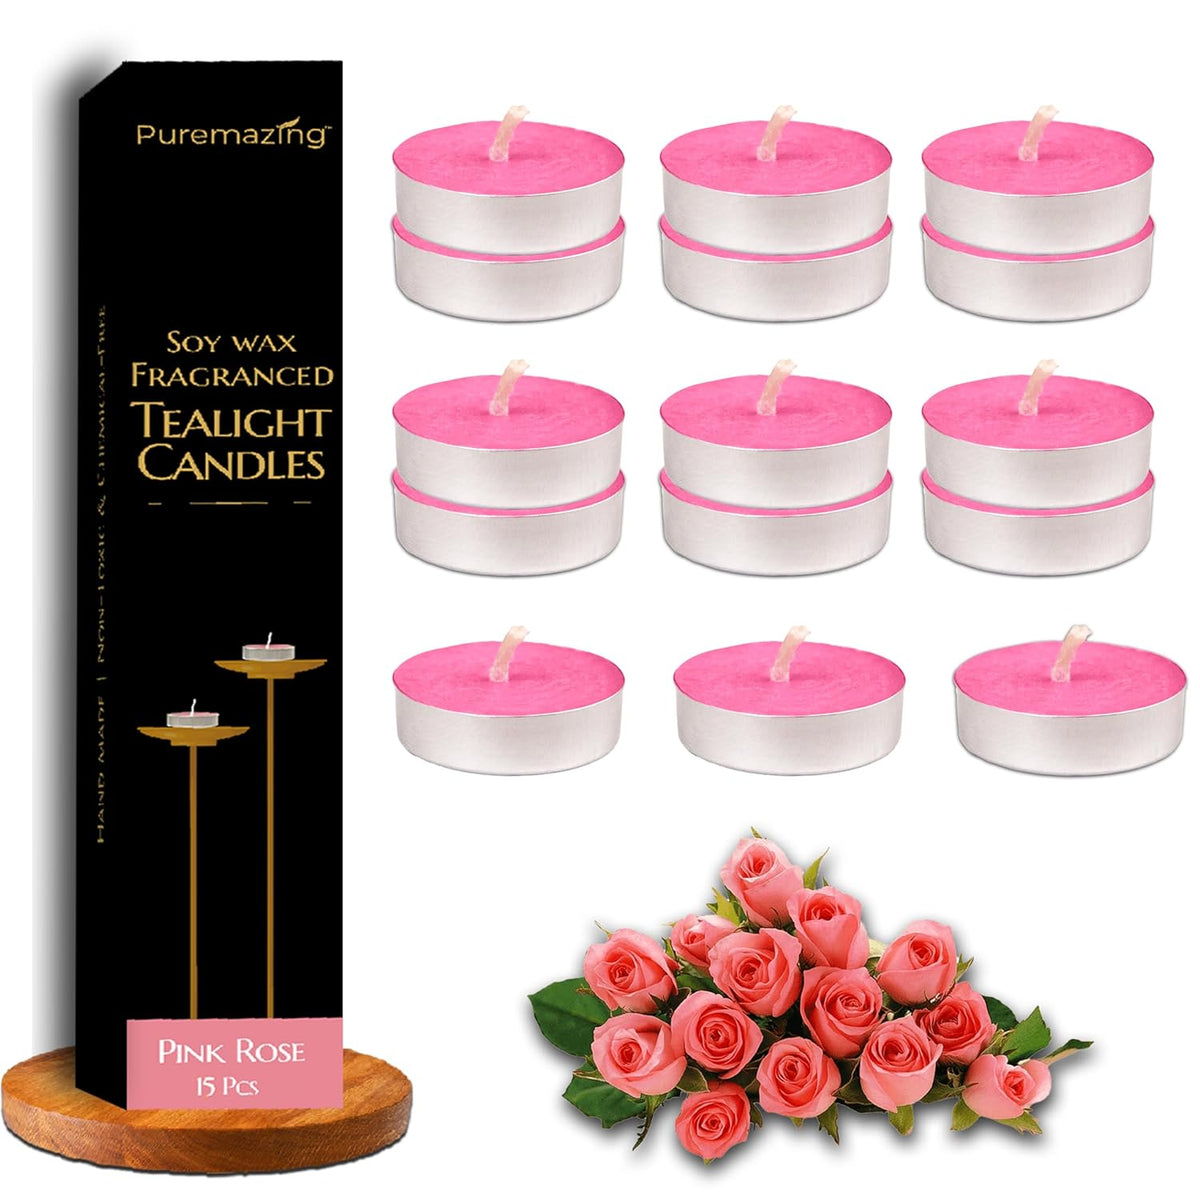 Puremazing Scented Soy Wax Tealight Candles